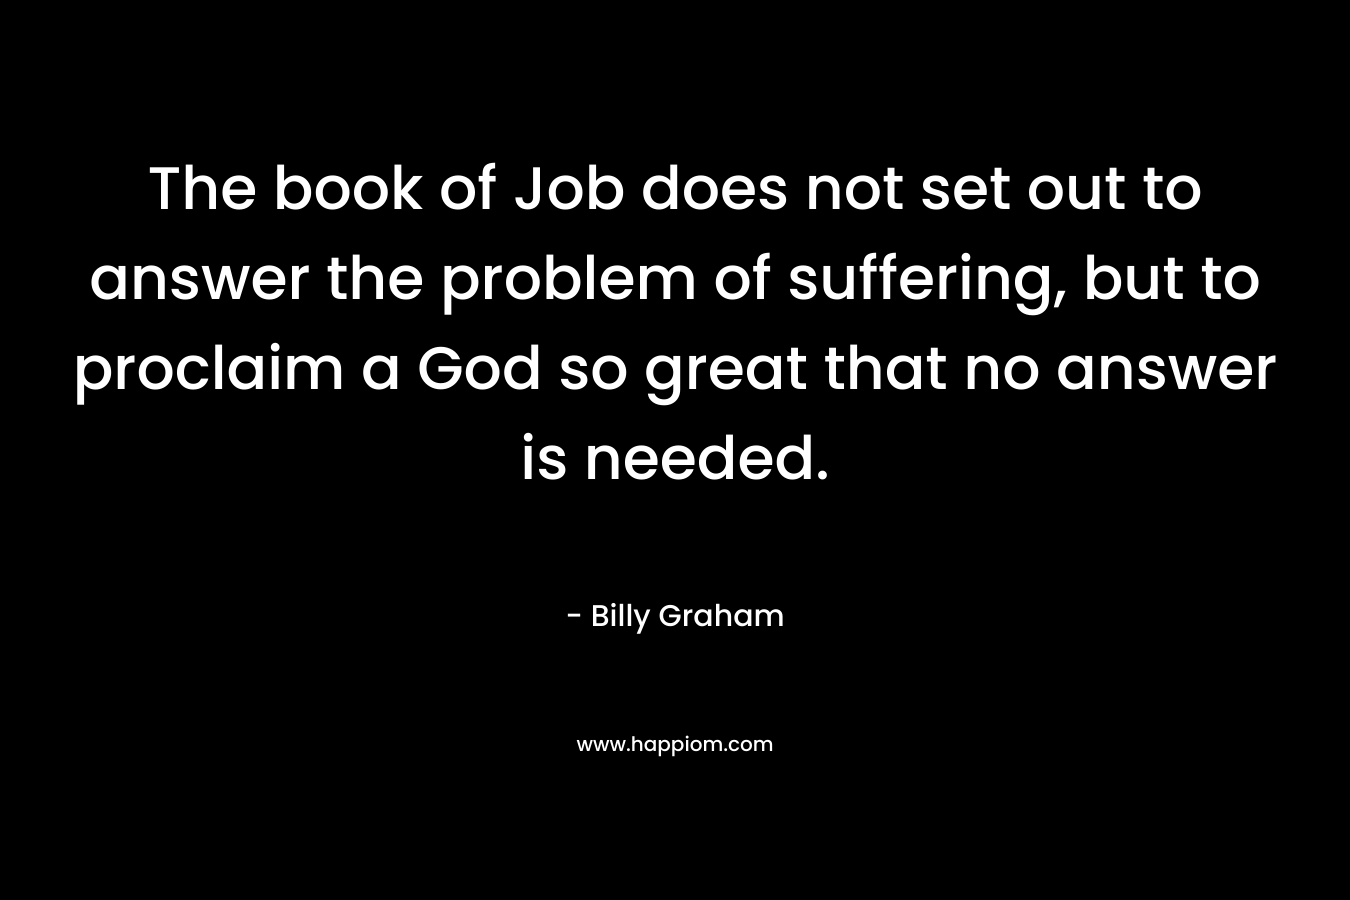 The book of Job does not set out to answer the problem of suffering, but to proclaim a God so great that no answer is needed.